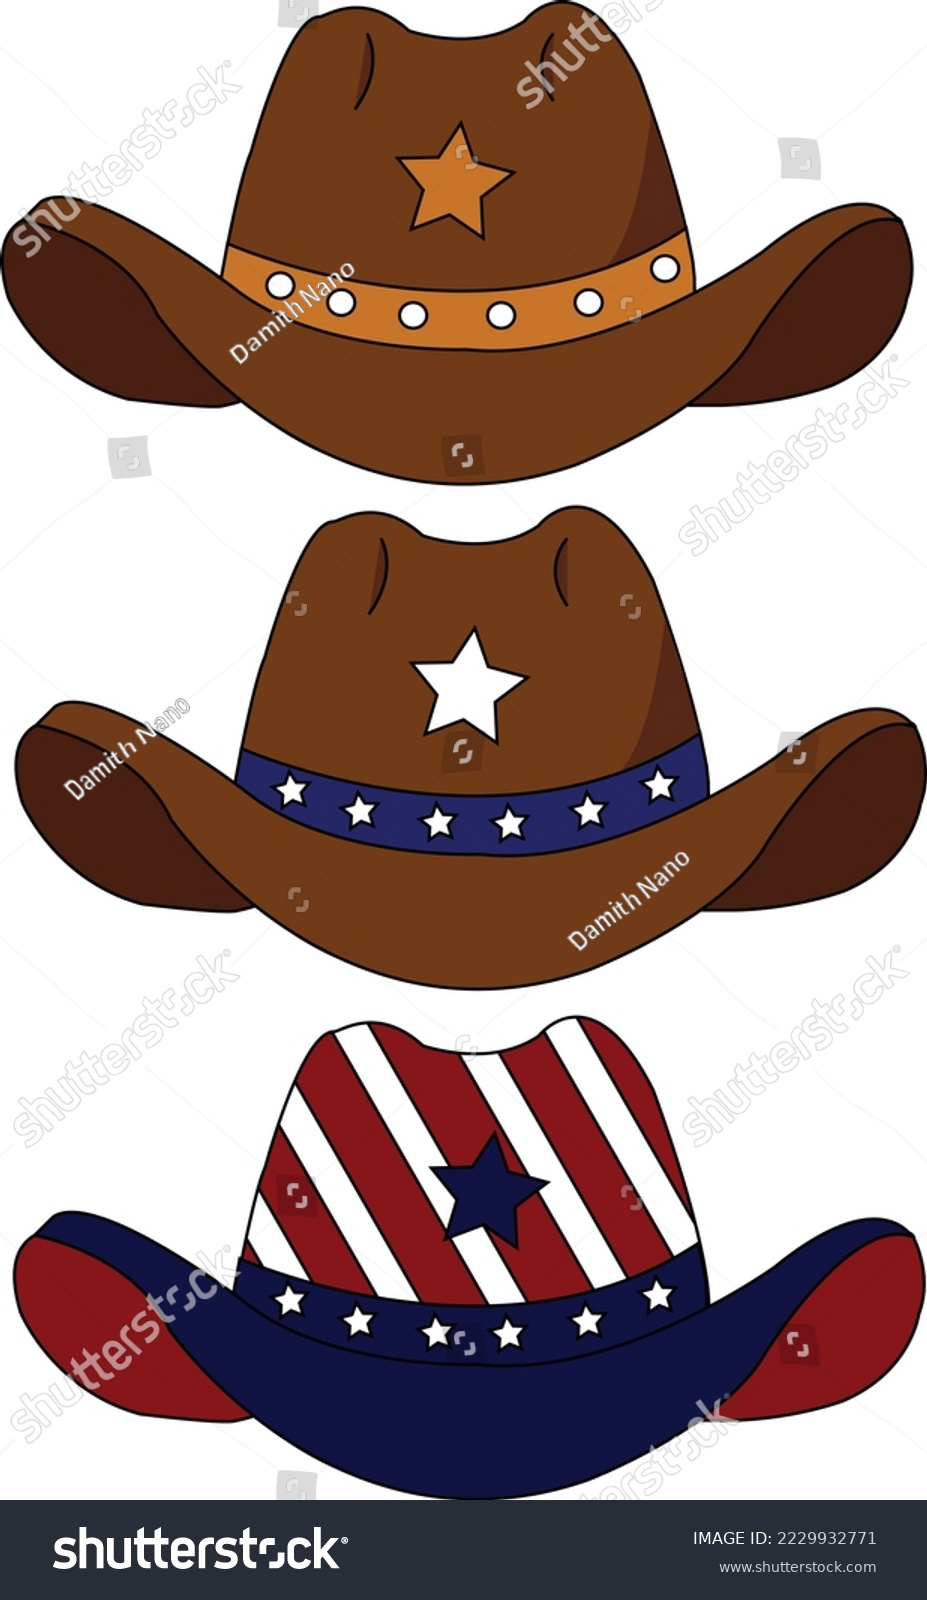 SVG of The Cow Boy Hats.This is a vector art .The hats have 3 variation designs include American flag design and retro color art works. svg